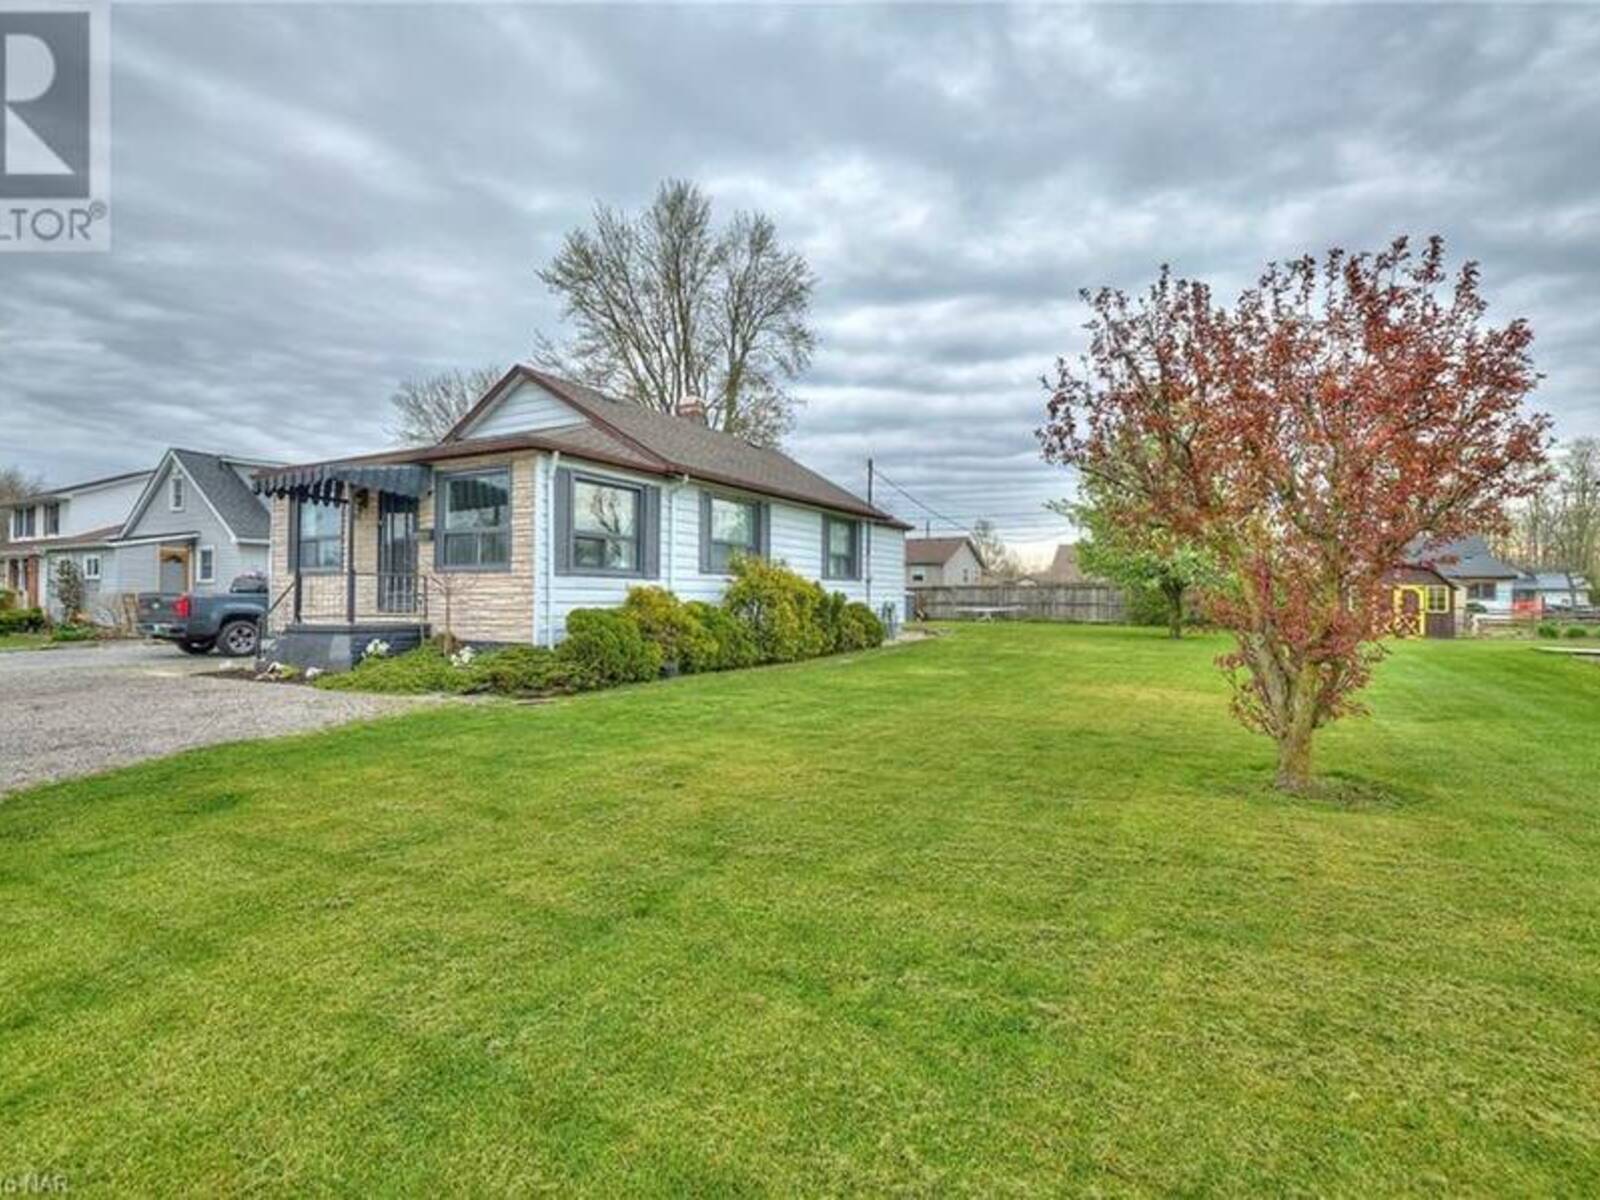 490 FAIRVIEW Road, Fort Erie, Ontario L2A 4S3